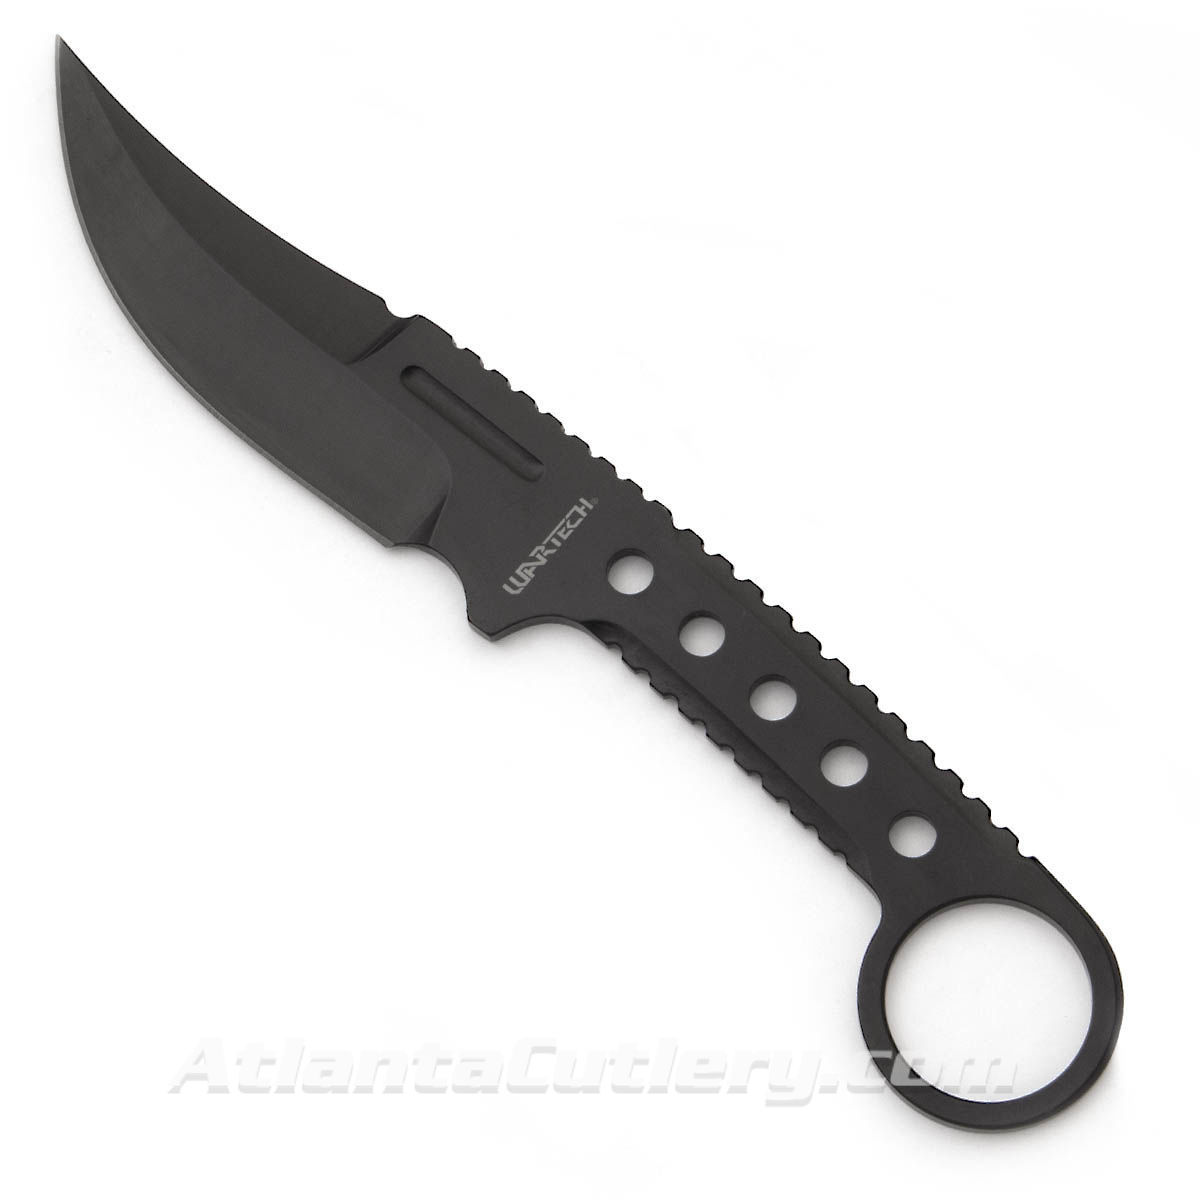 Wartech Clip Point Knife is crafted from a single piece of 3CR13 stainless steel